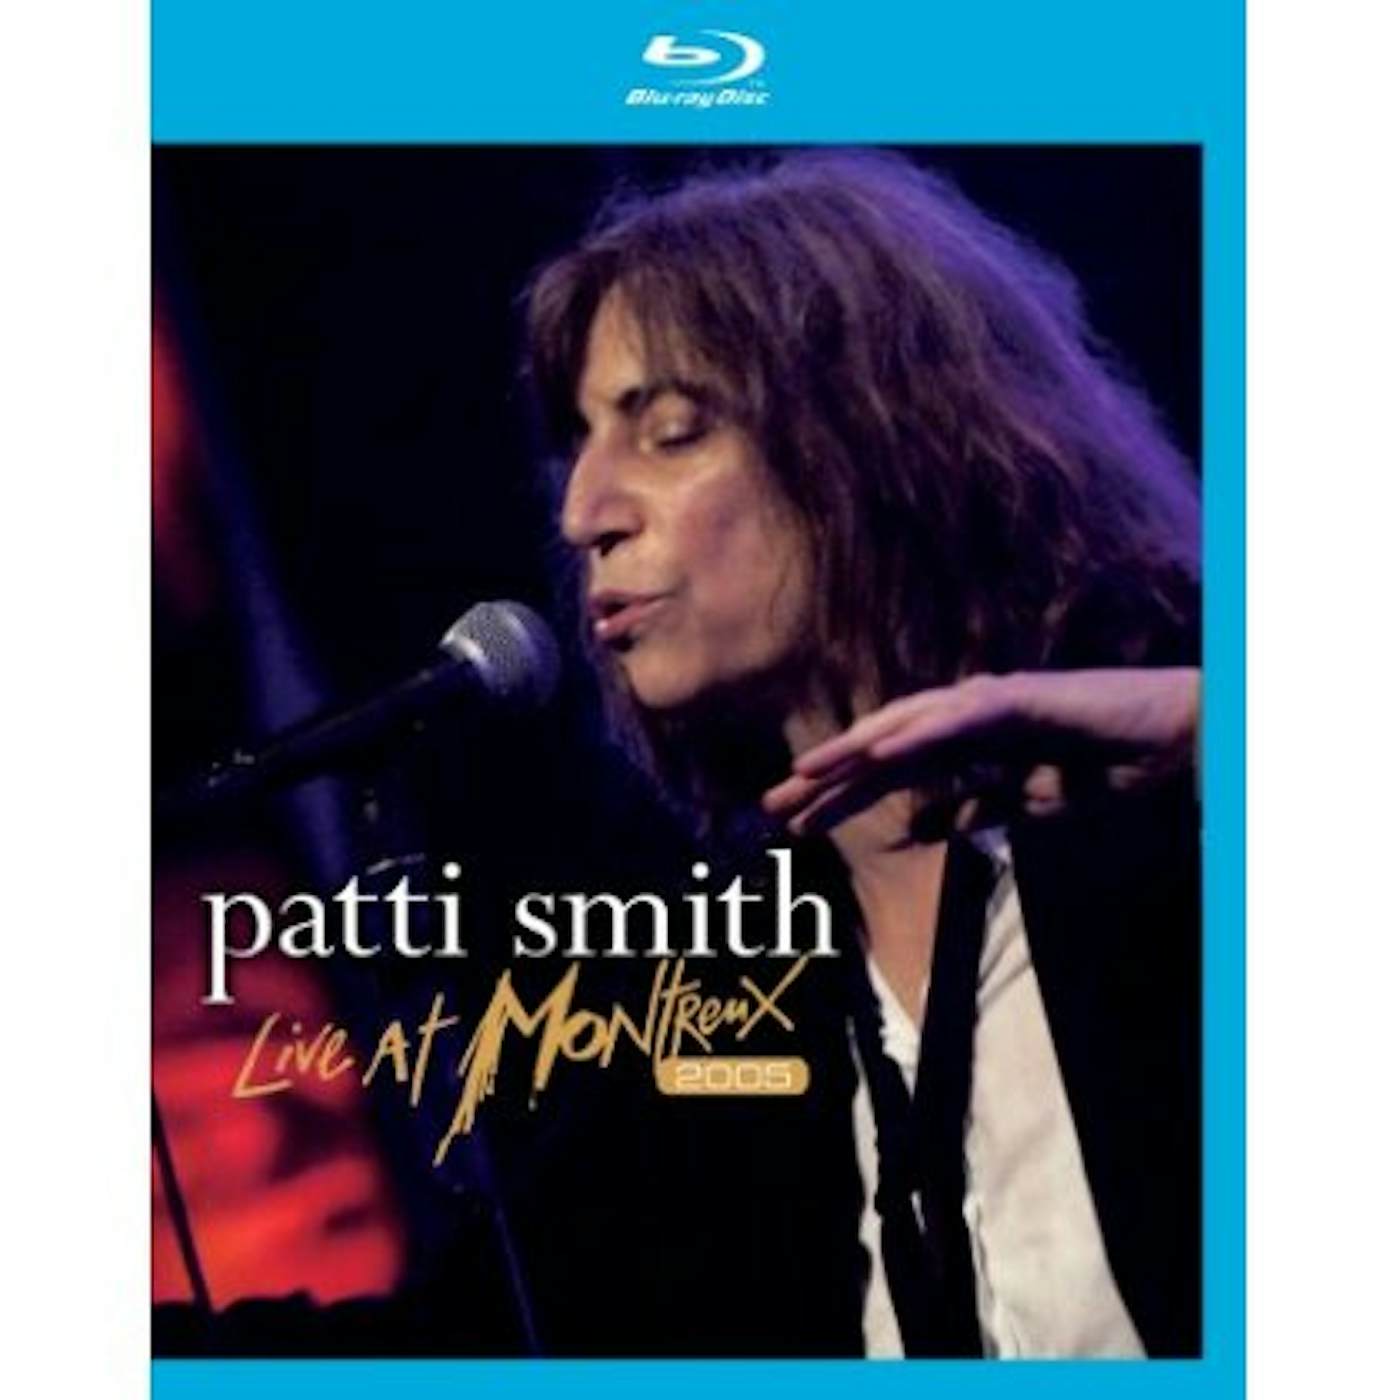 Patti Smith LIVE AT MONTREUX 2005 Blu-ray